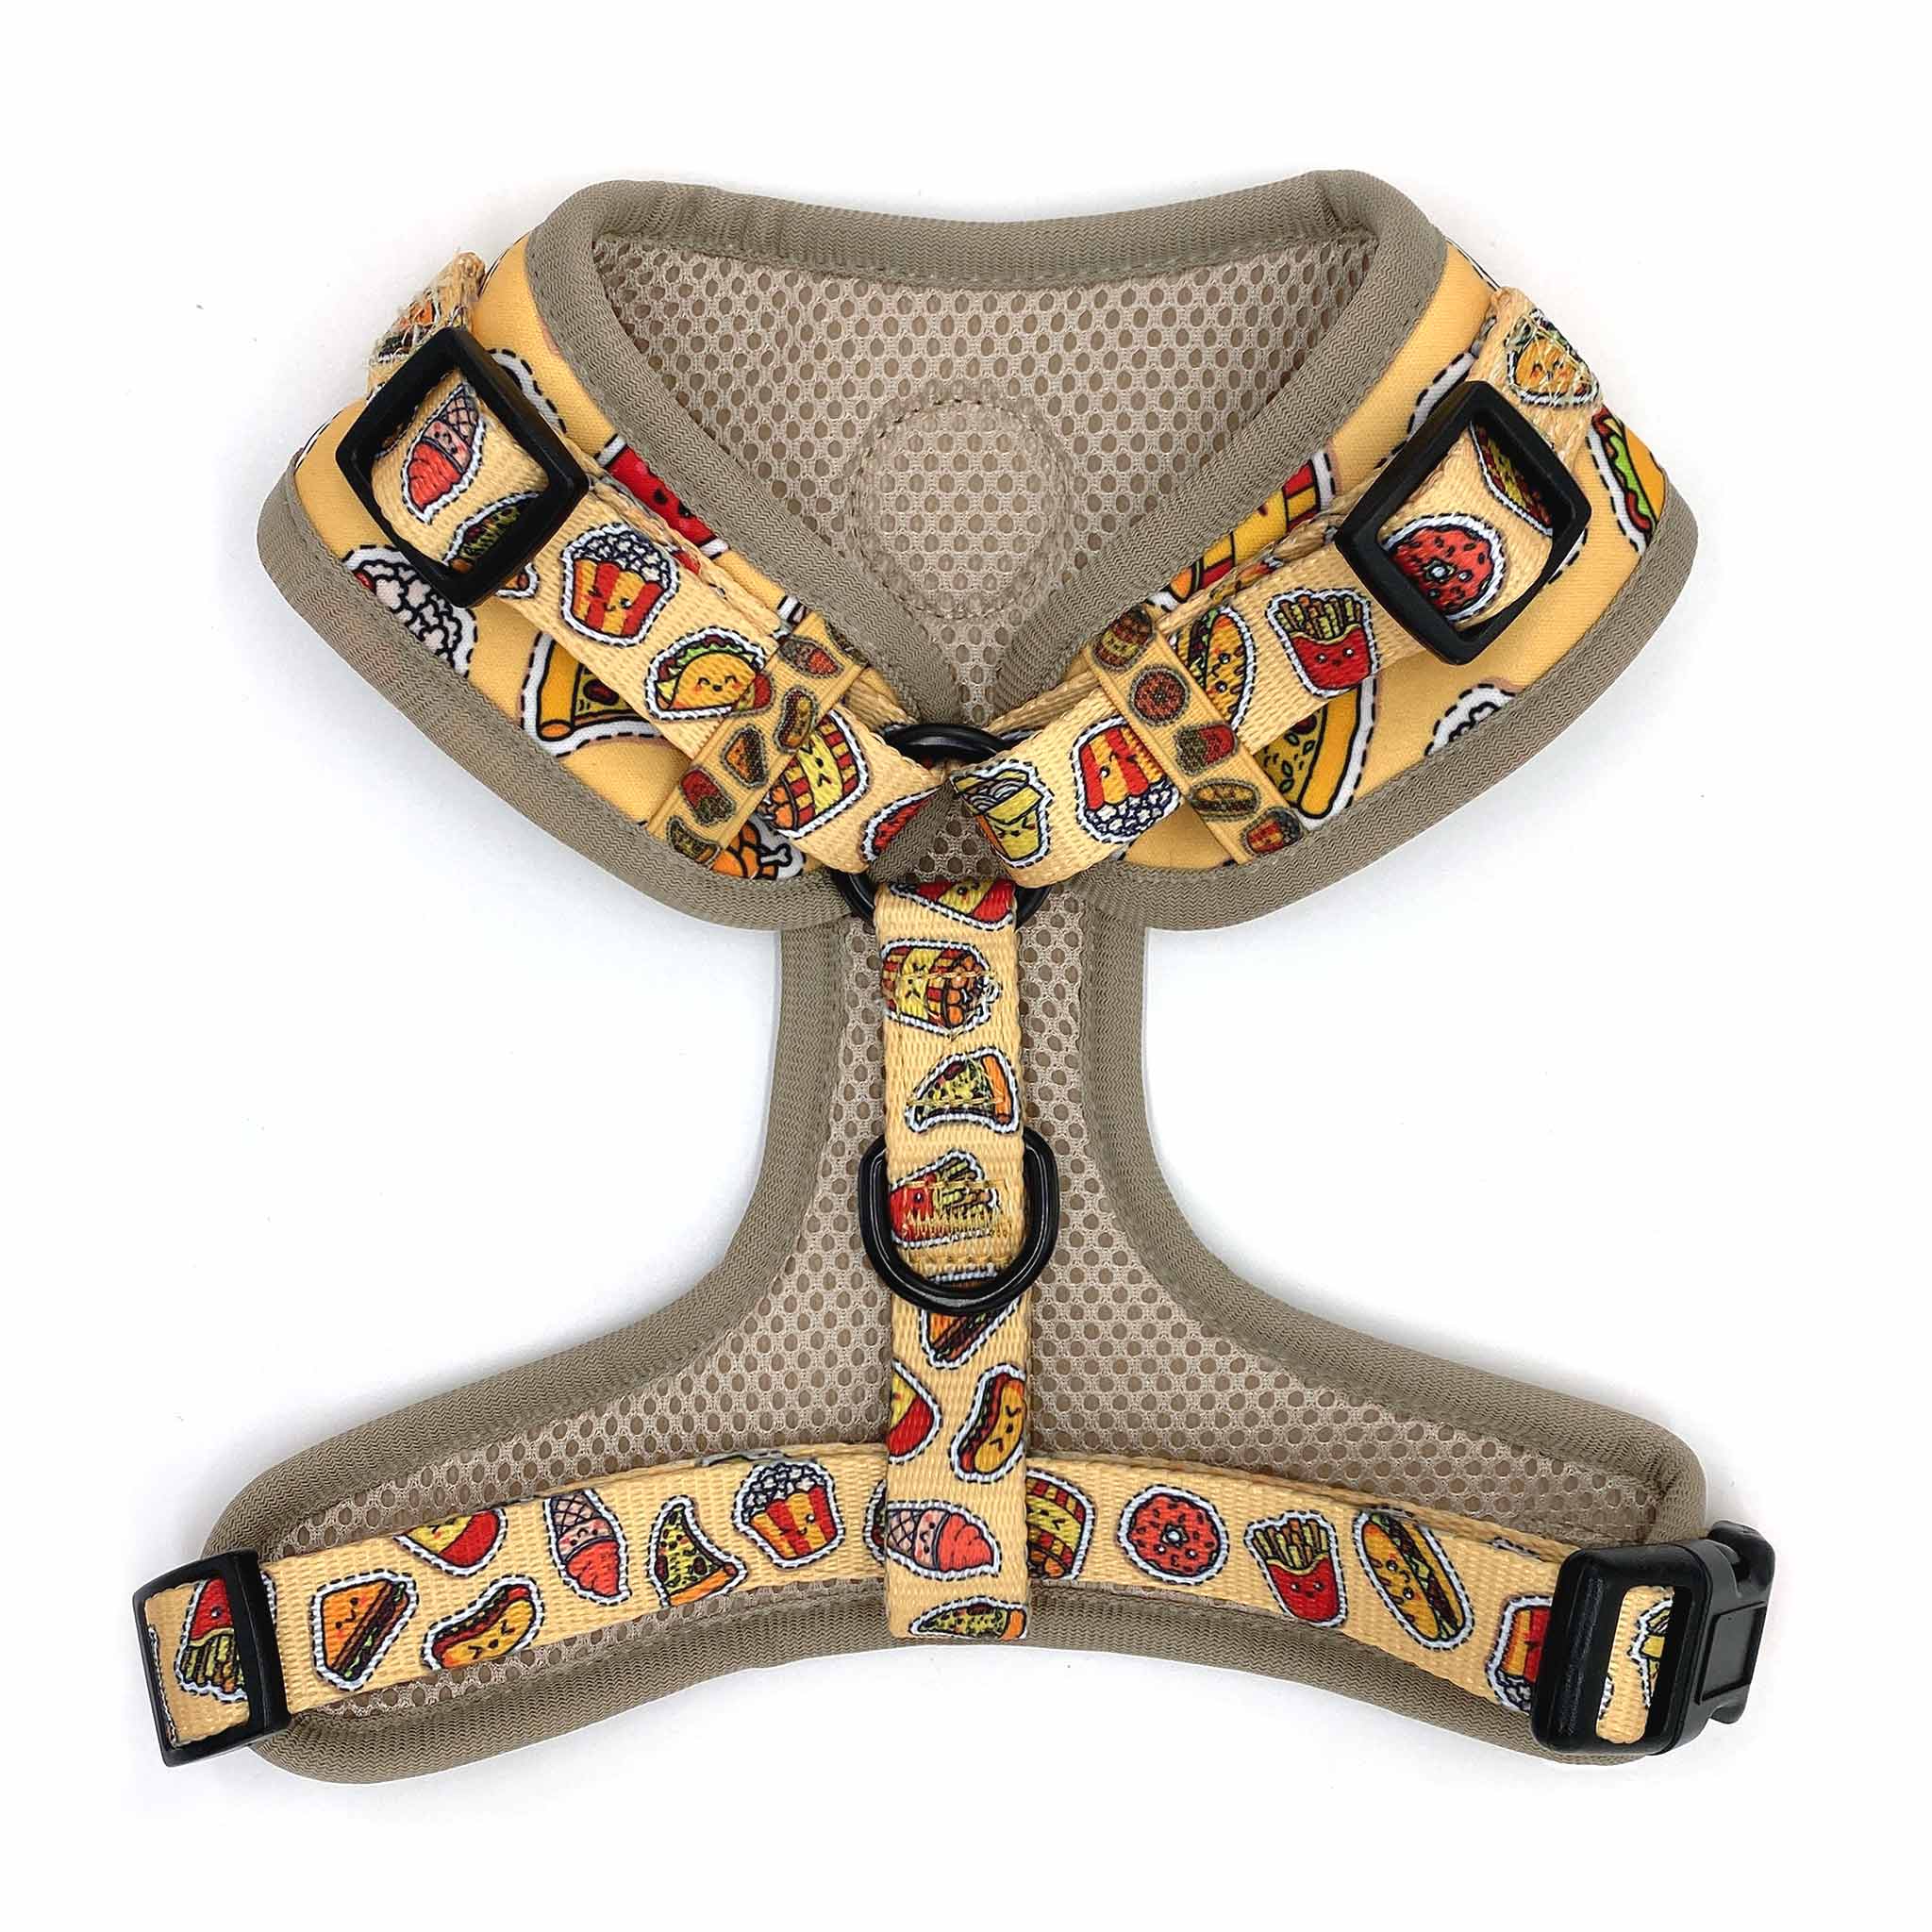 Back view of Pipco Pets adjustable dog harness with Snack Pack junk food print pattern in yellow 